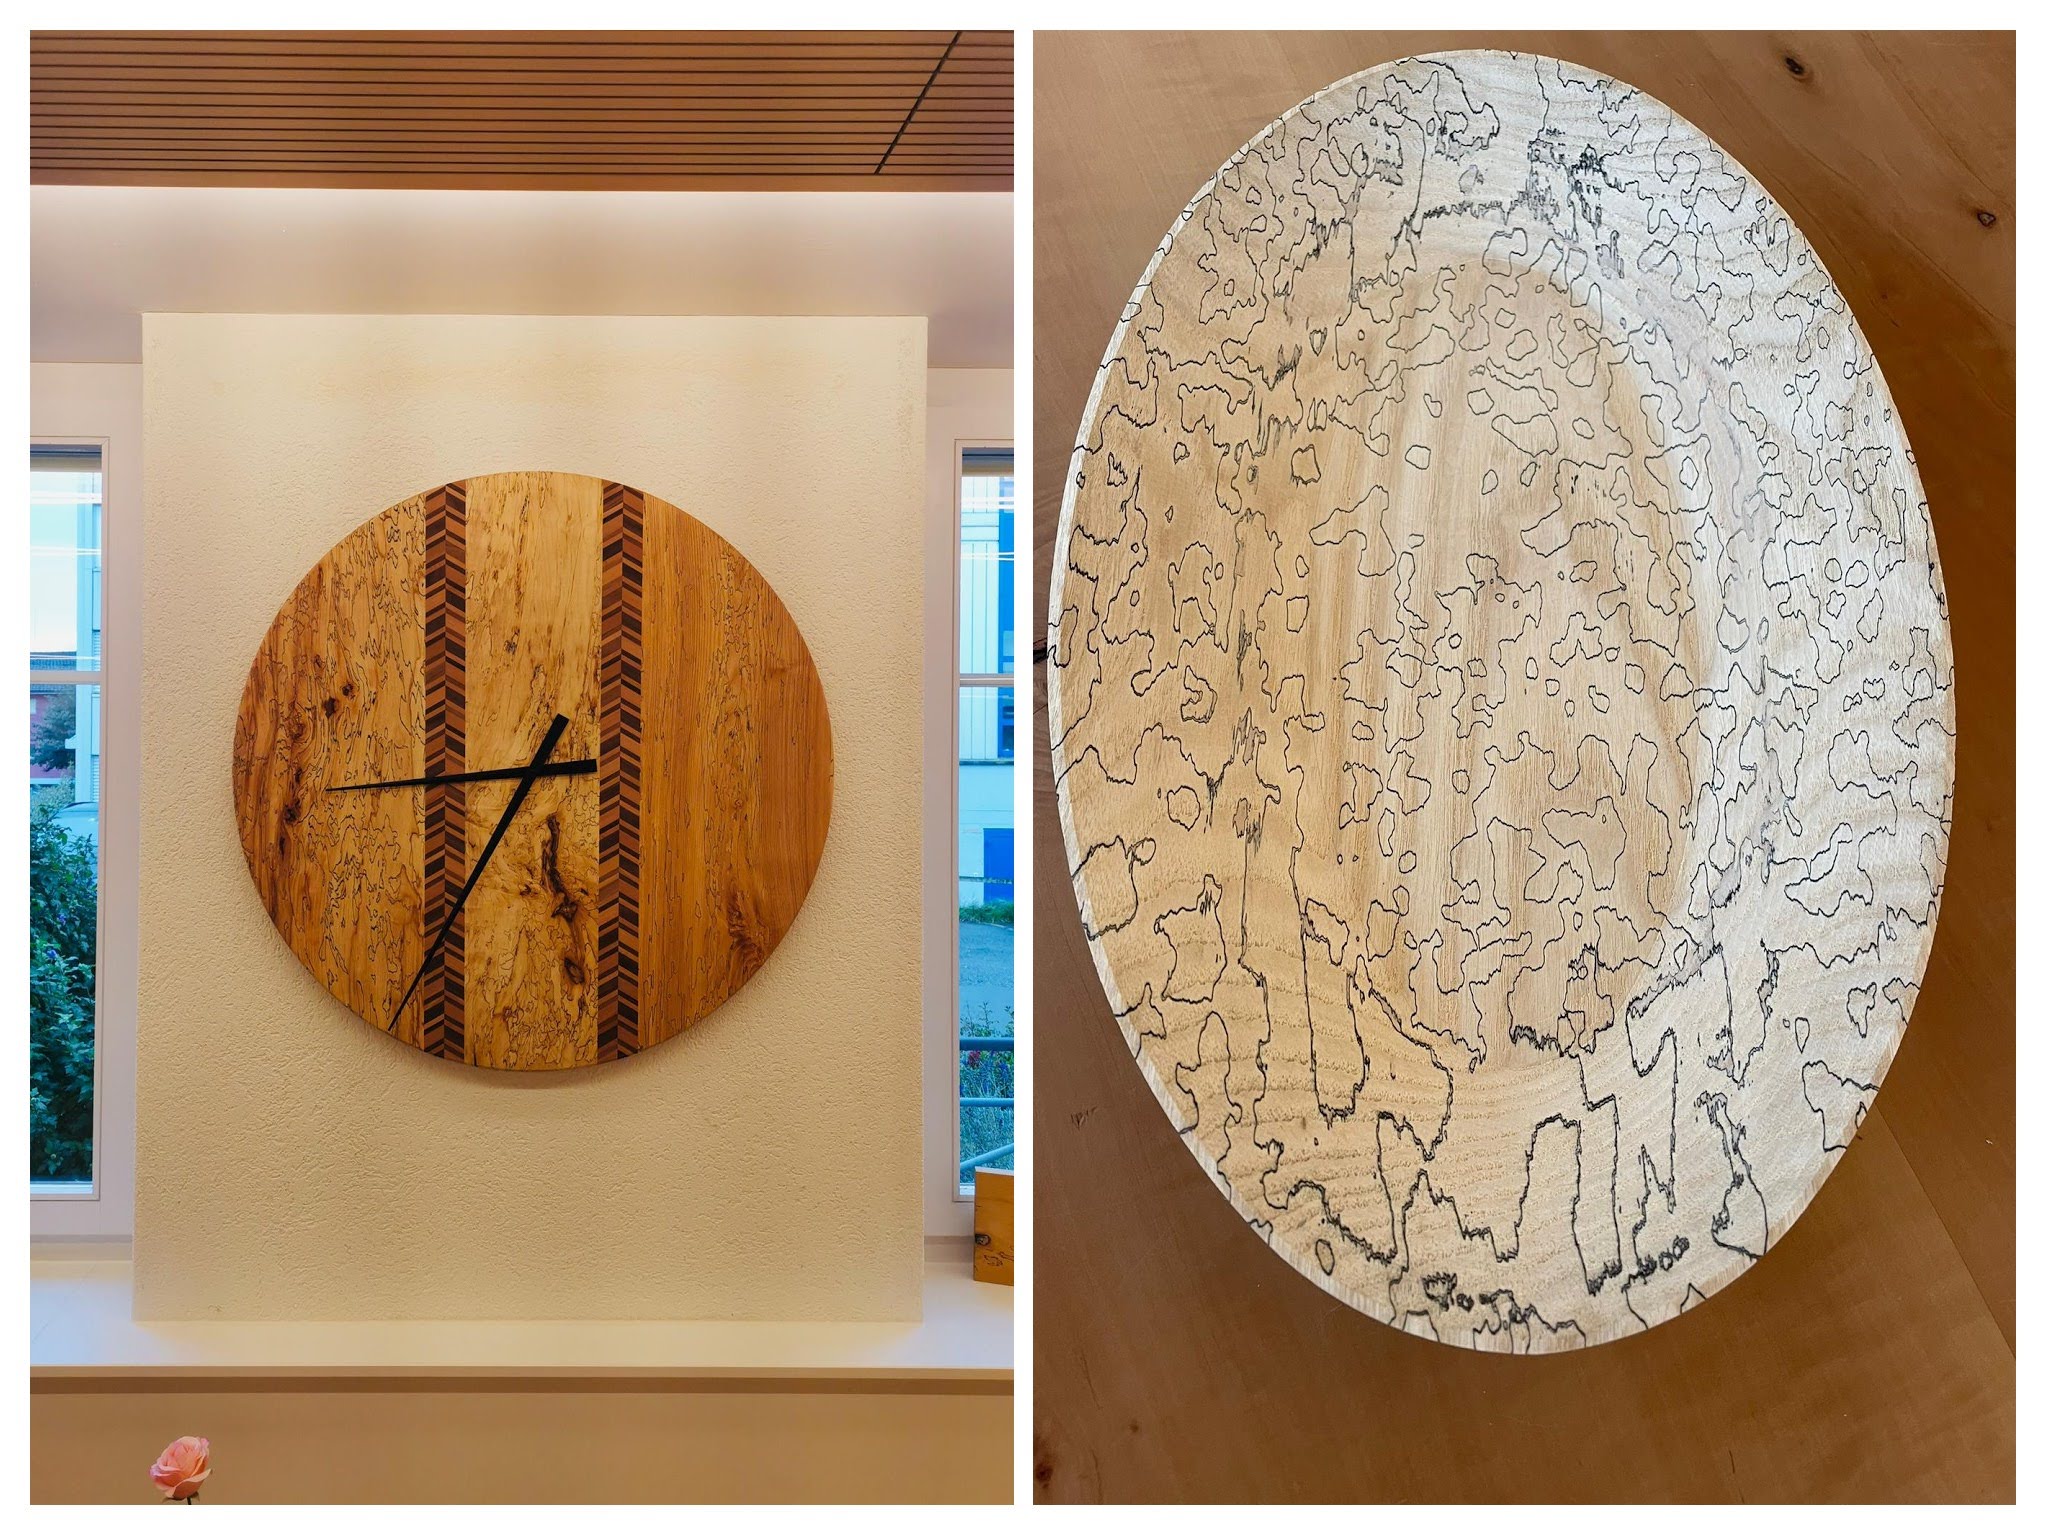 On the left is a big clock with two parallel lines designed by fungus. On the right, a bowl with squiggly lines are throughout the bowl, also designed with the help of fungus.